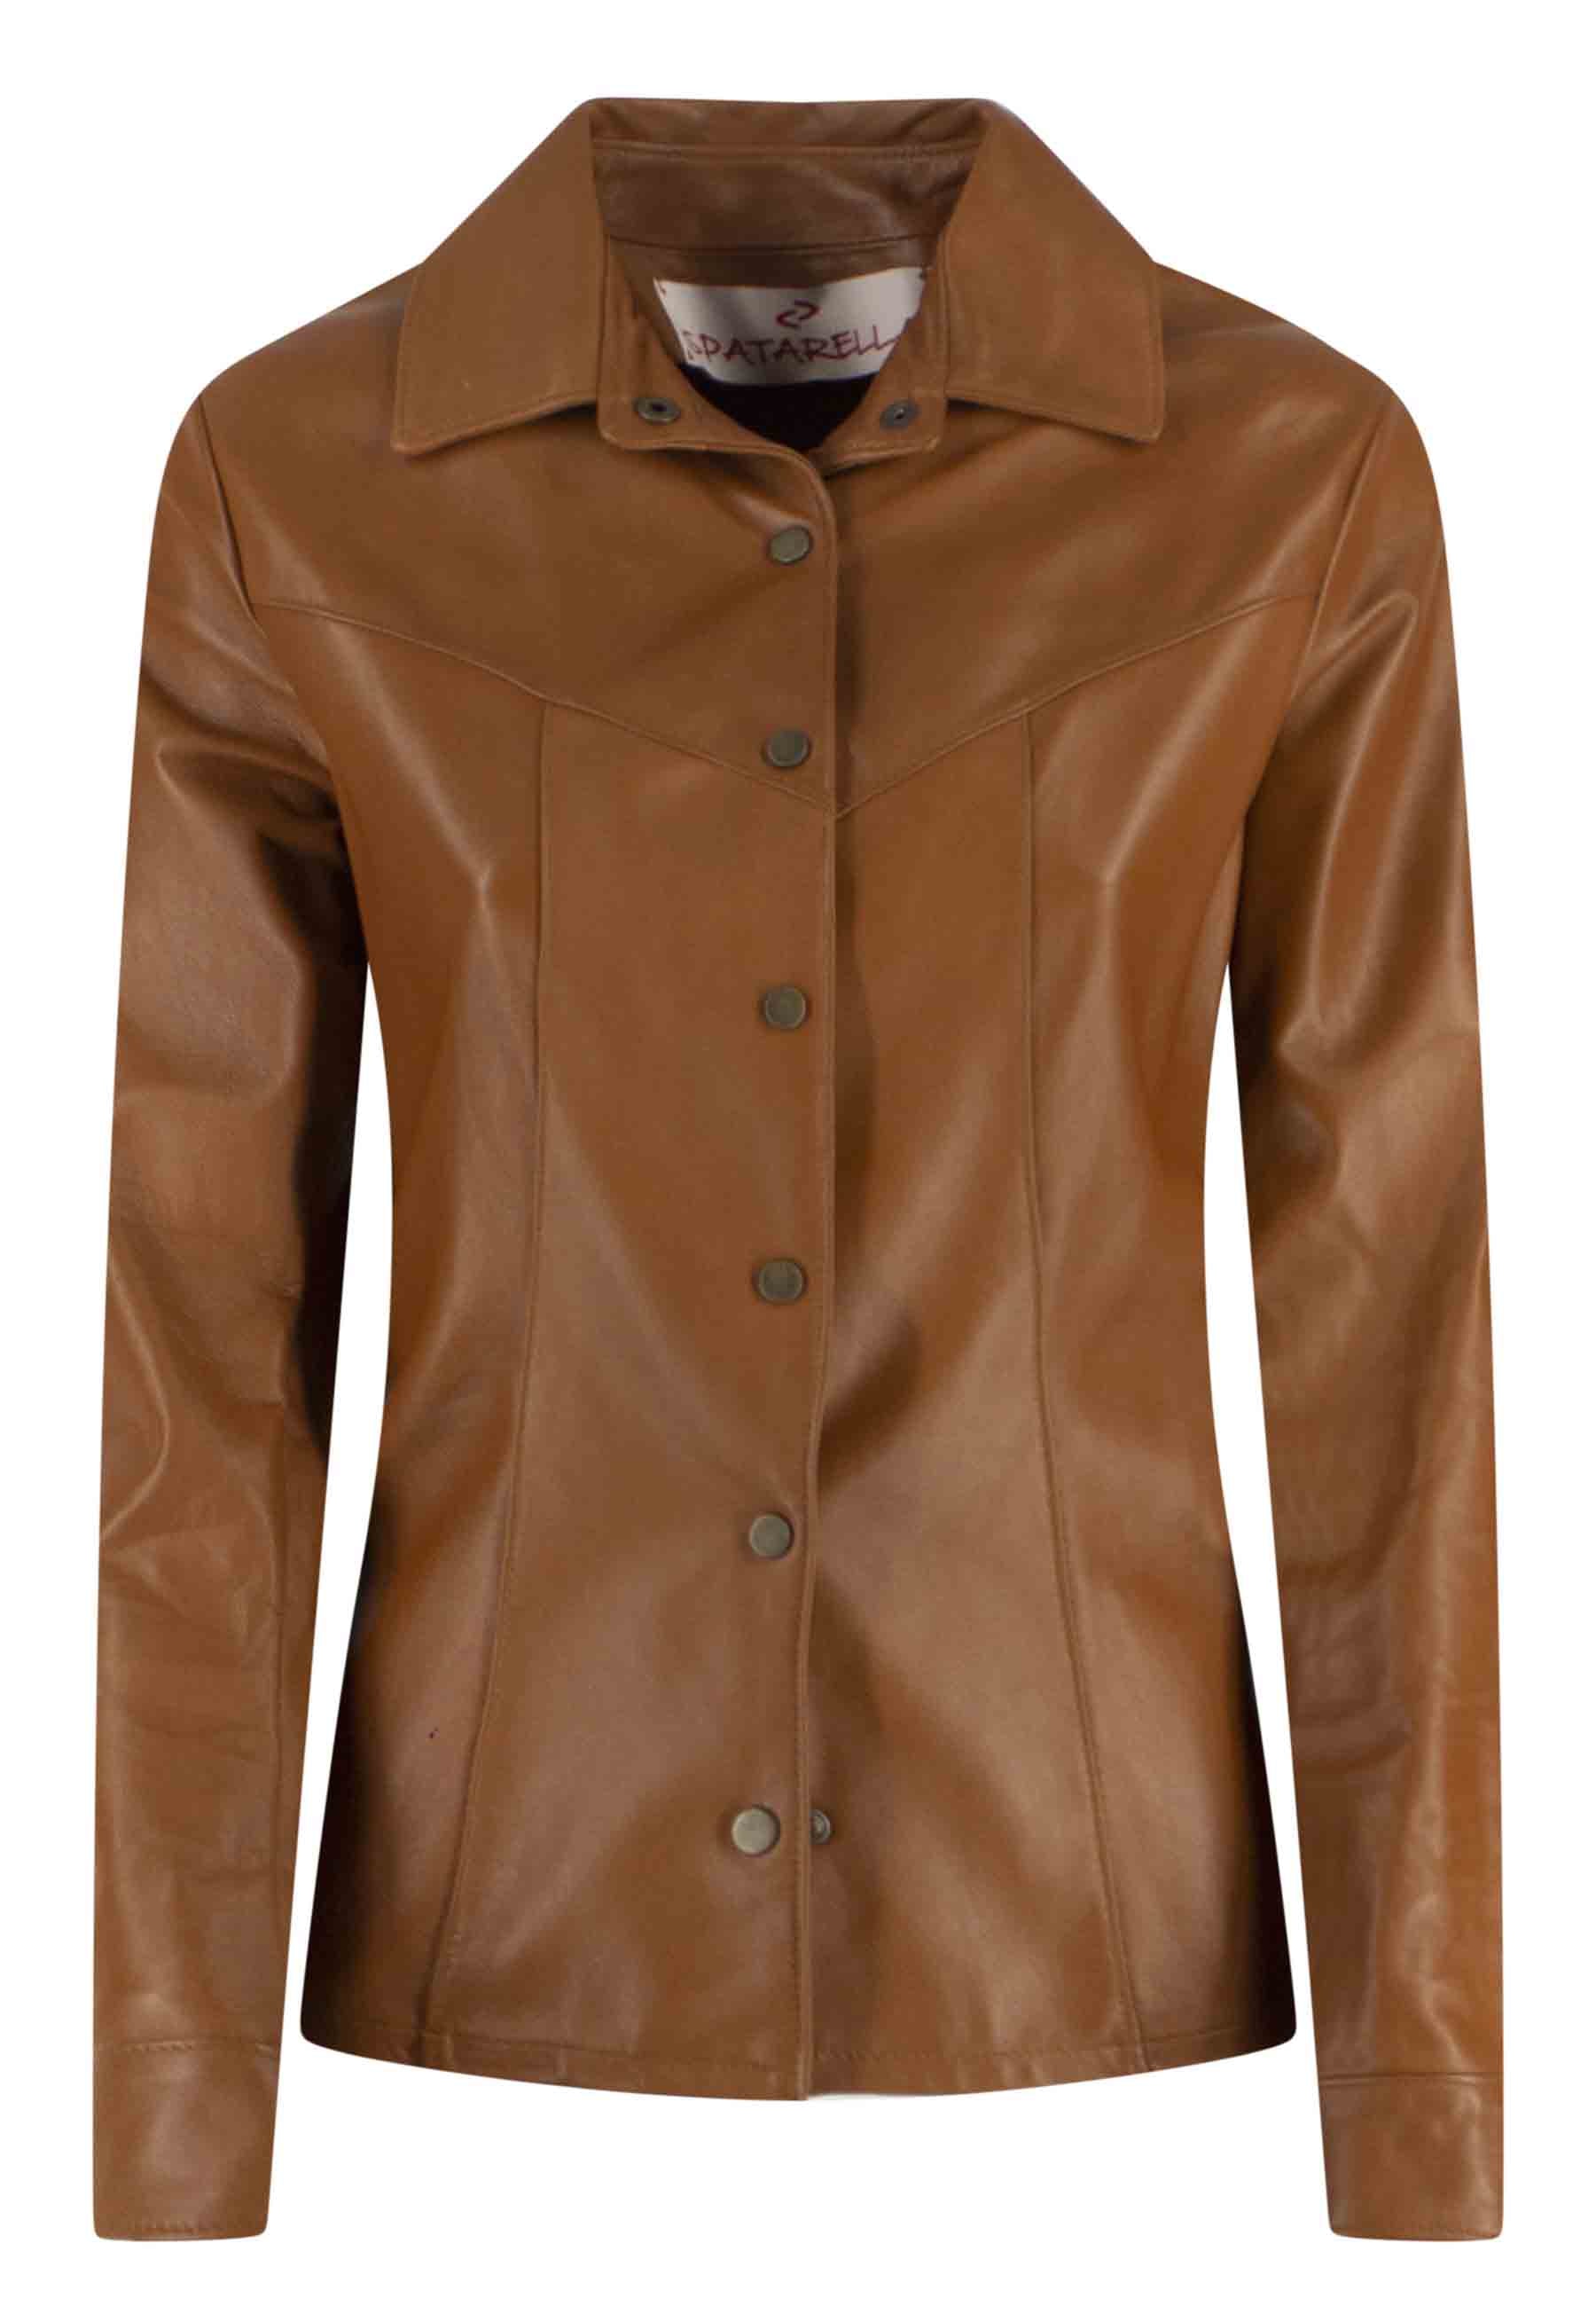 Women's unlined leather shirt with long sleeves